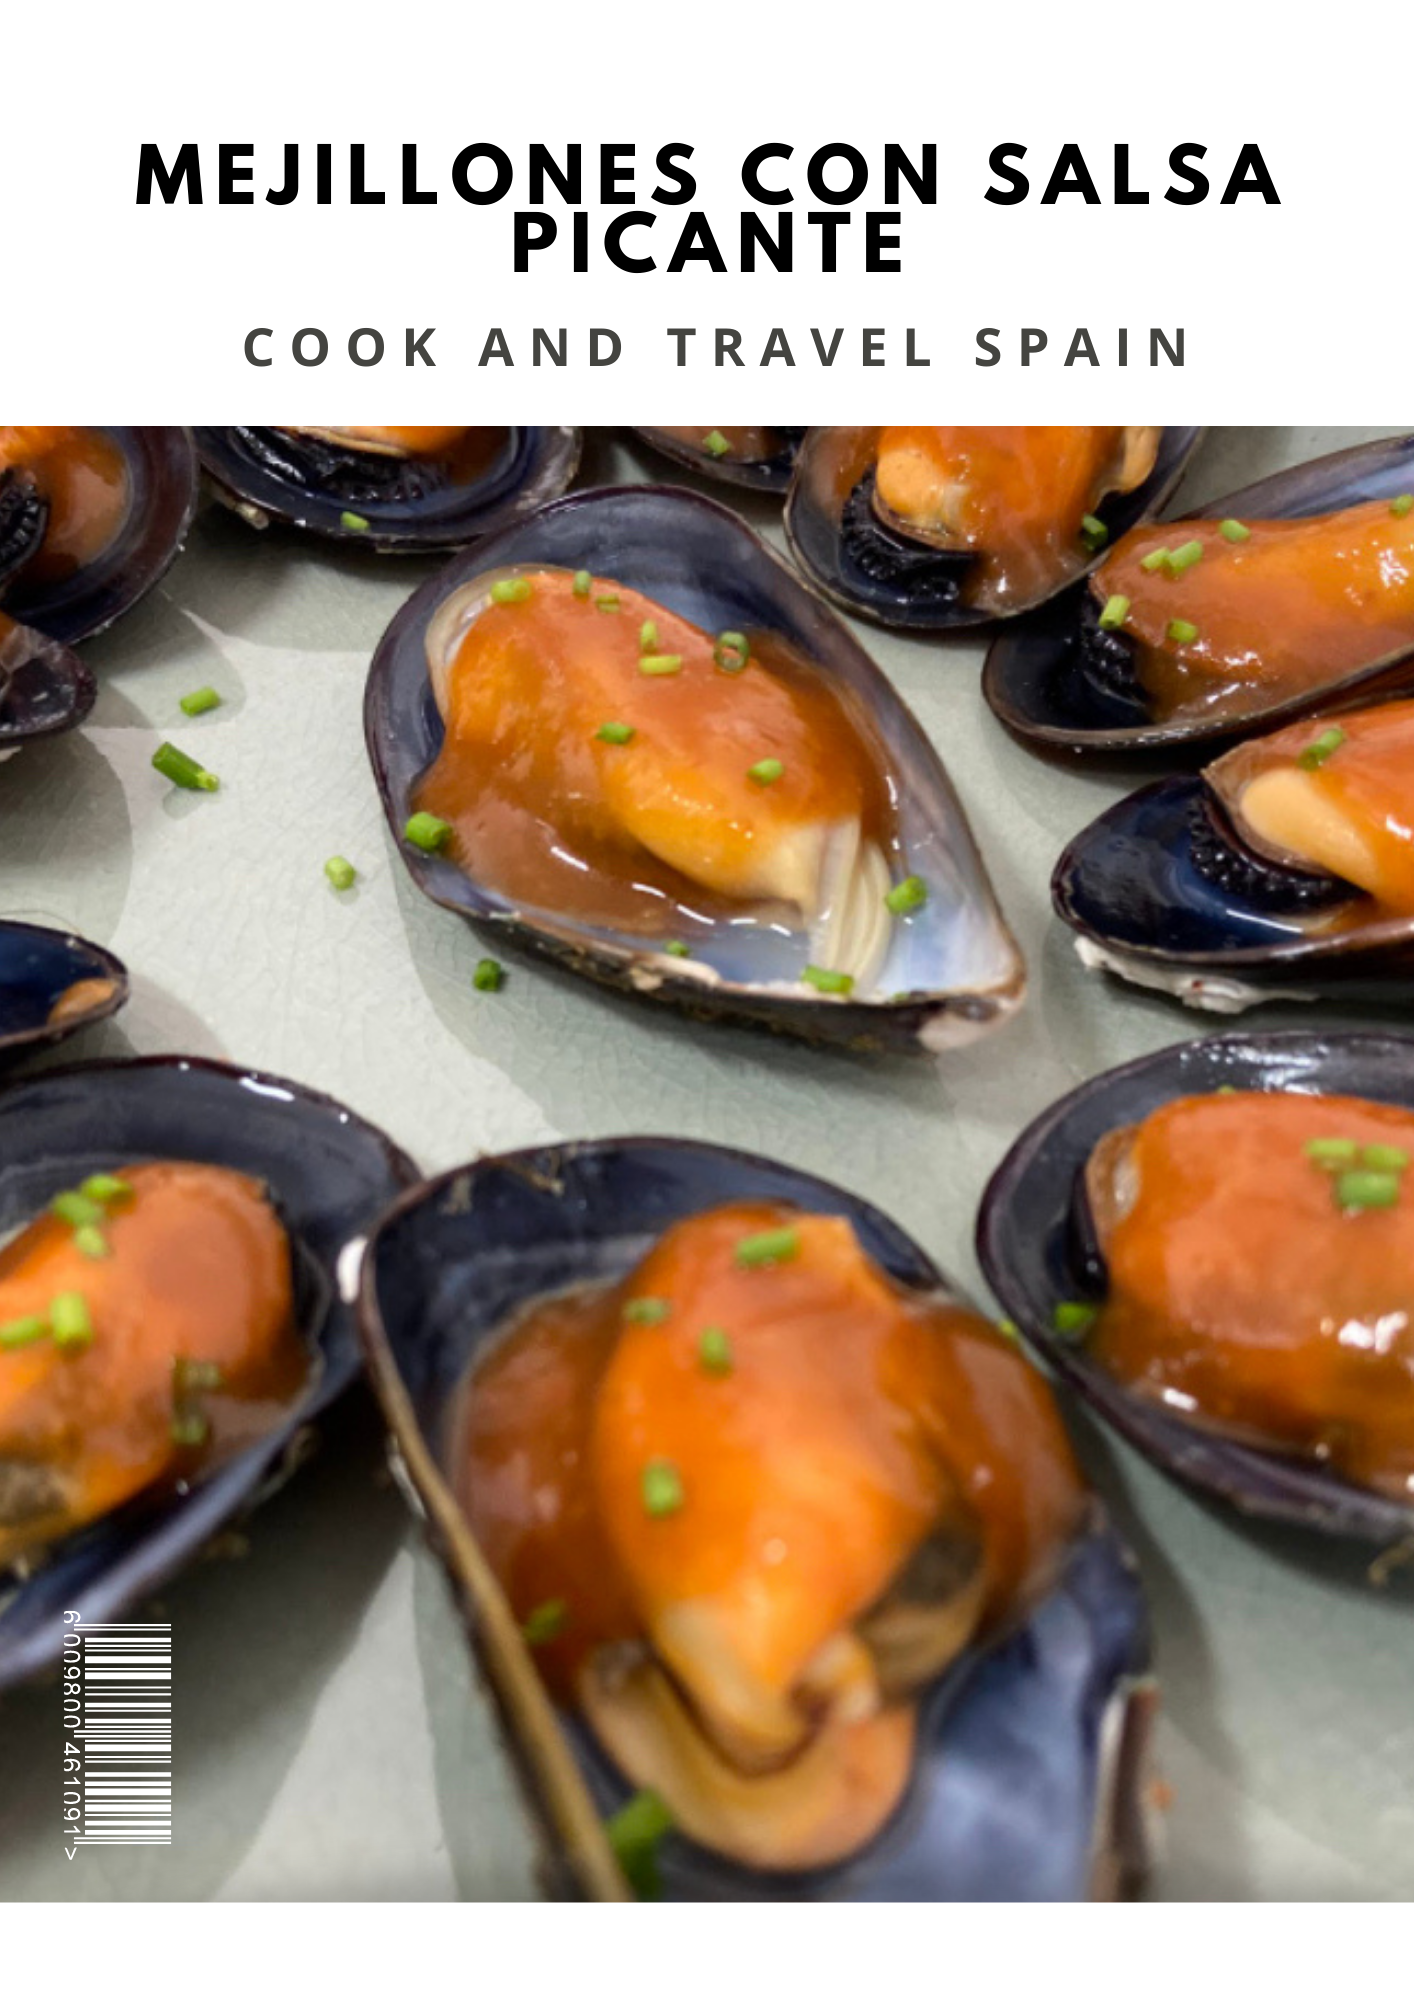 cook and travel spain